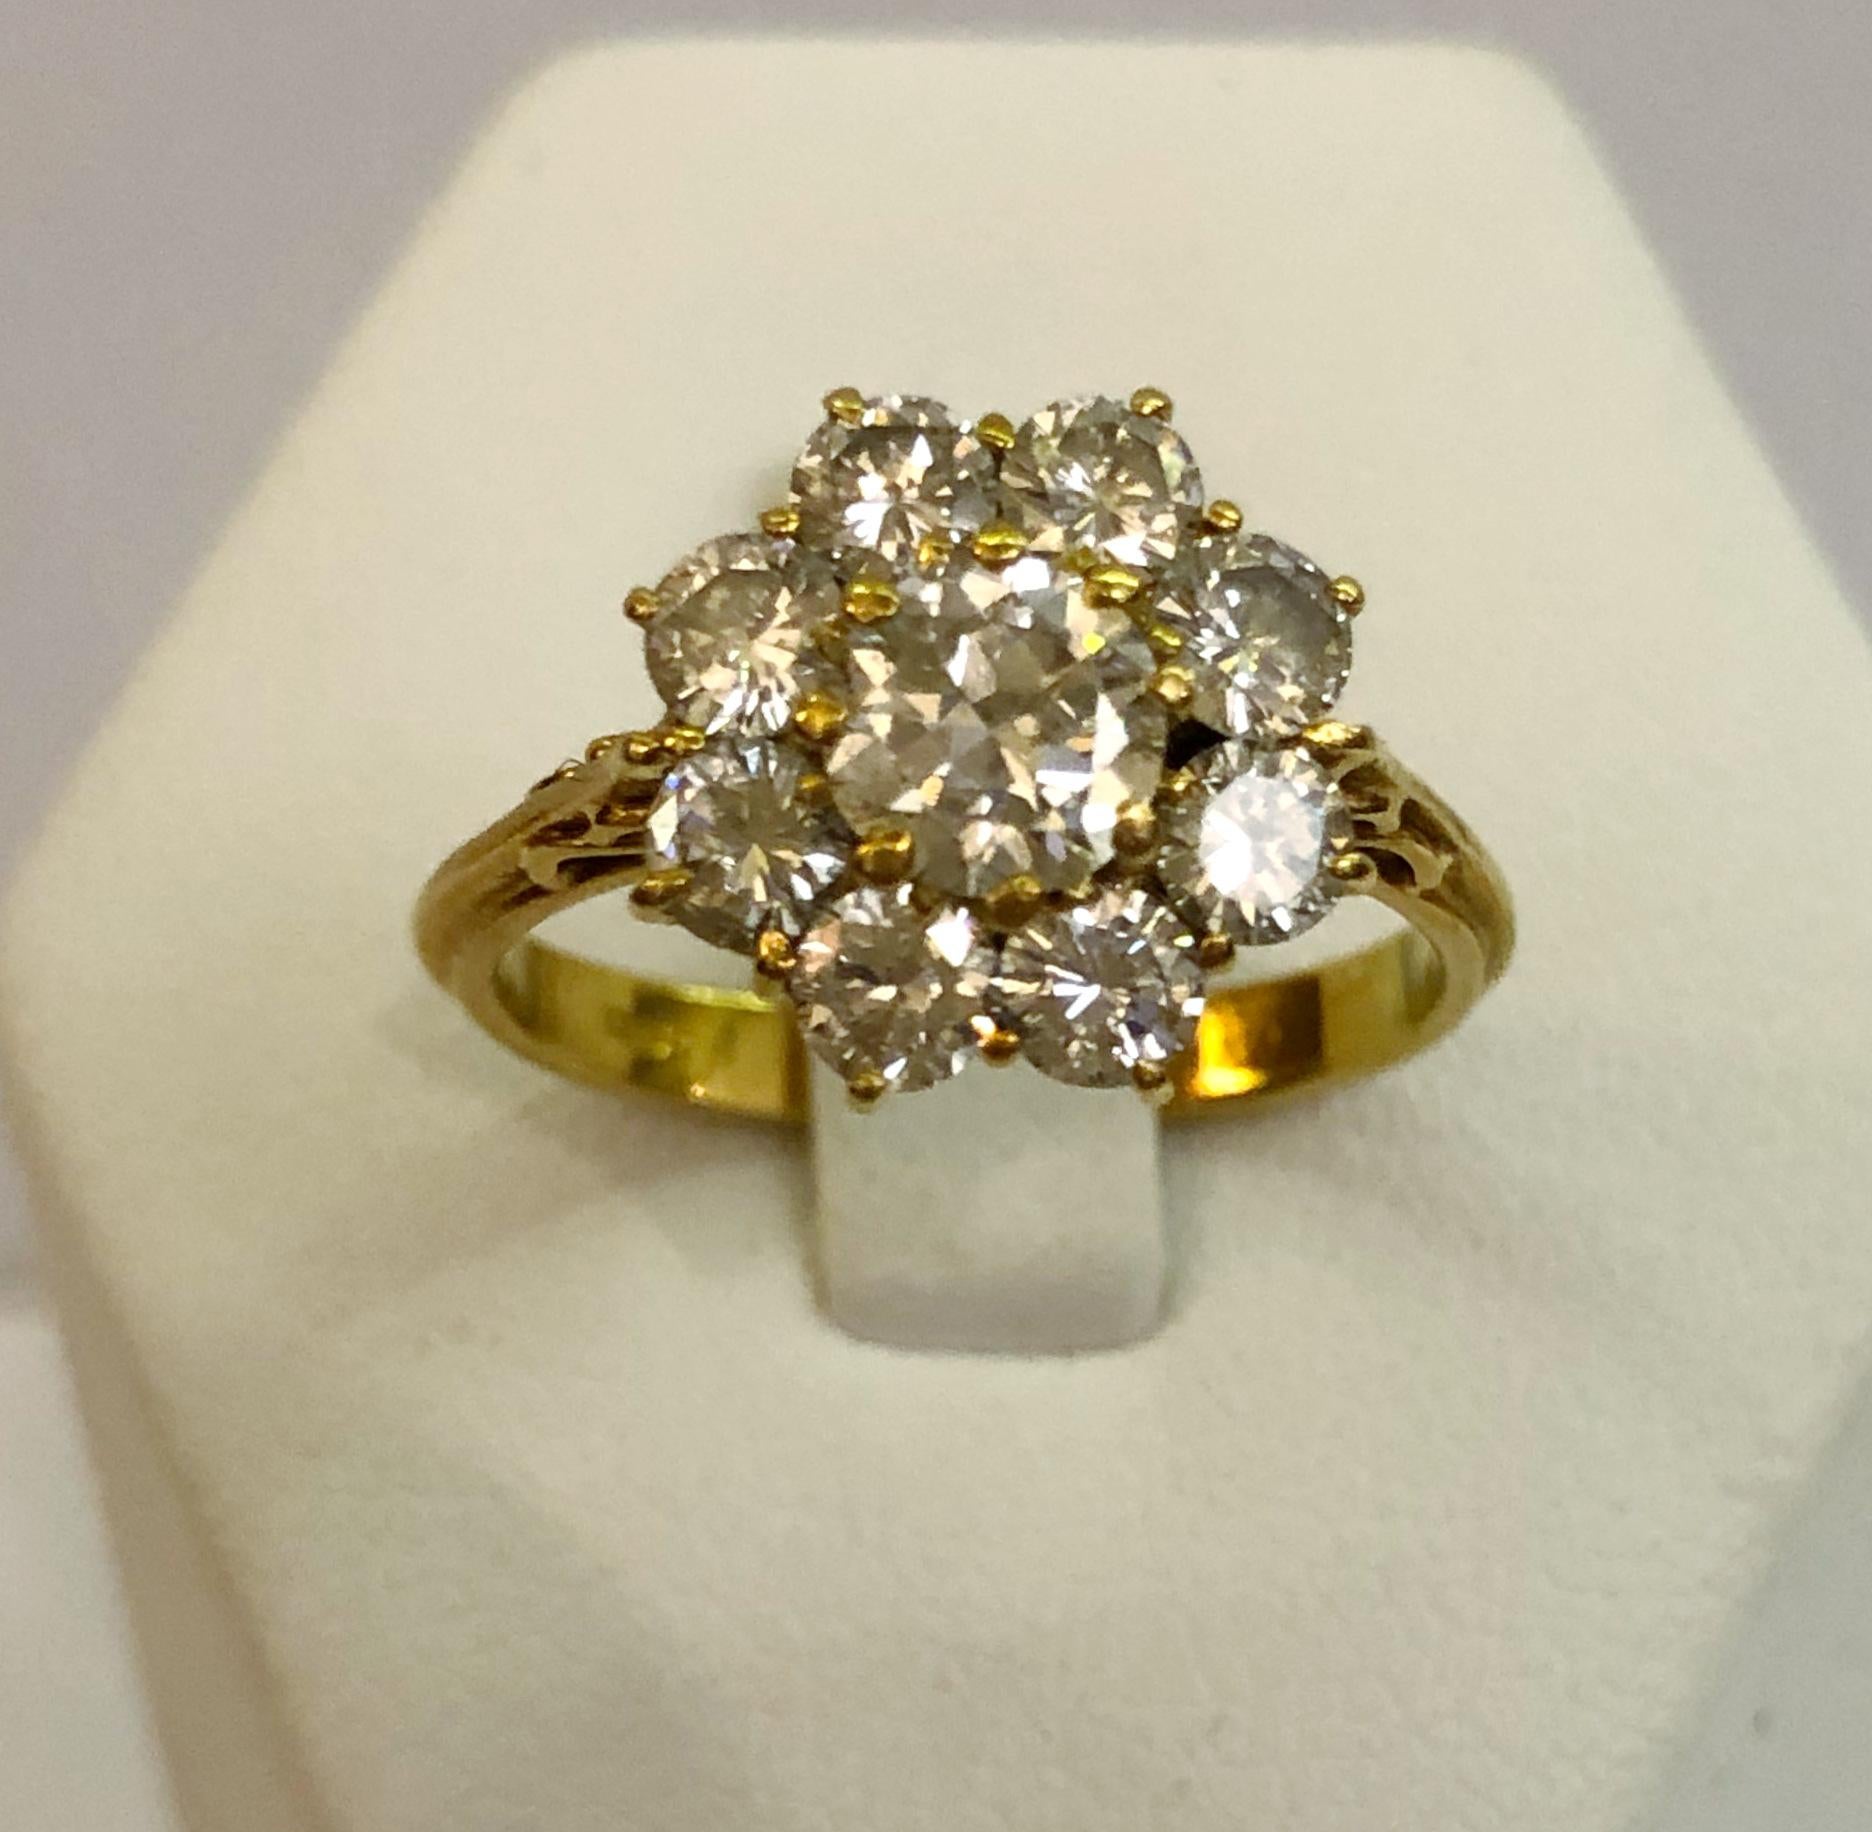 18 karat yellow gold daisy ring with brilliant diamonds for a total of 1.3 karats, Italy 1950-1960s
Ring size US 6